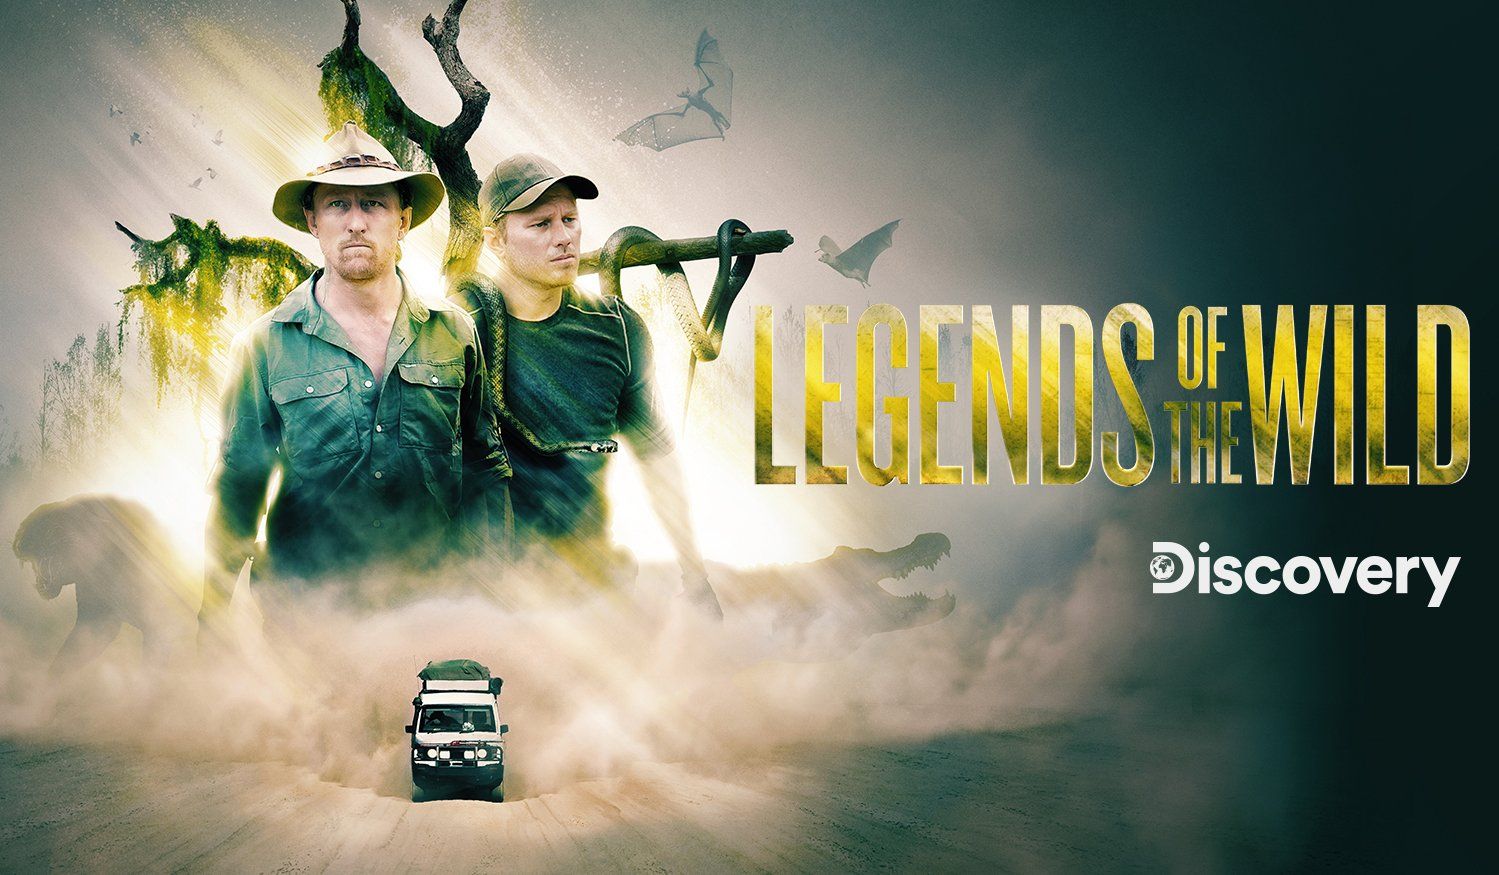 A poster for legends of the wild on discovery channel.